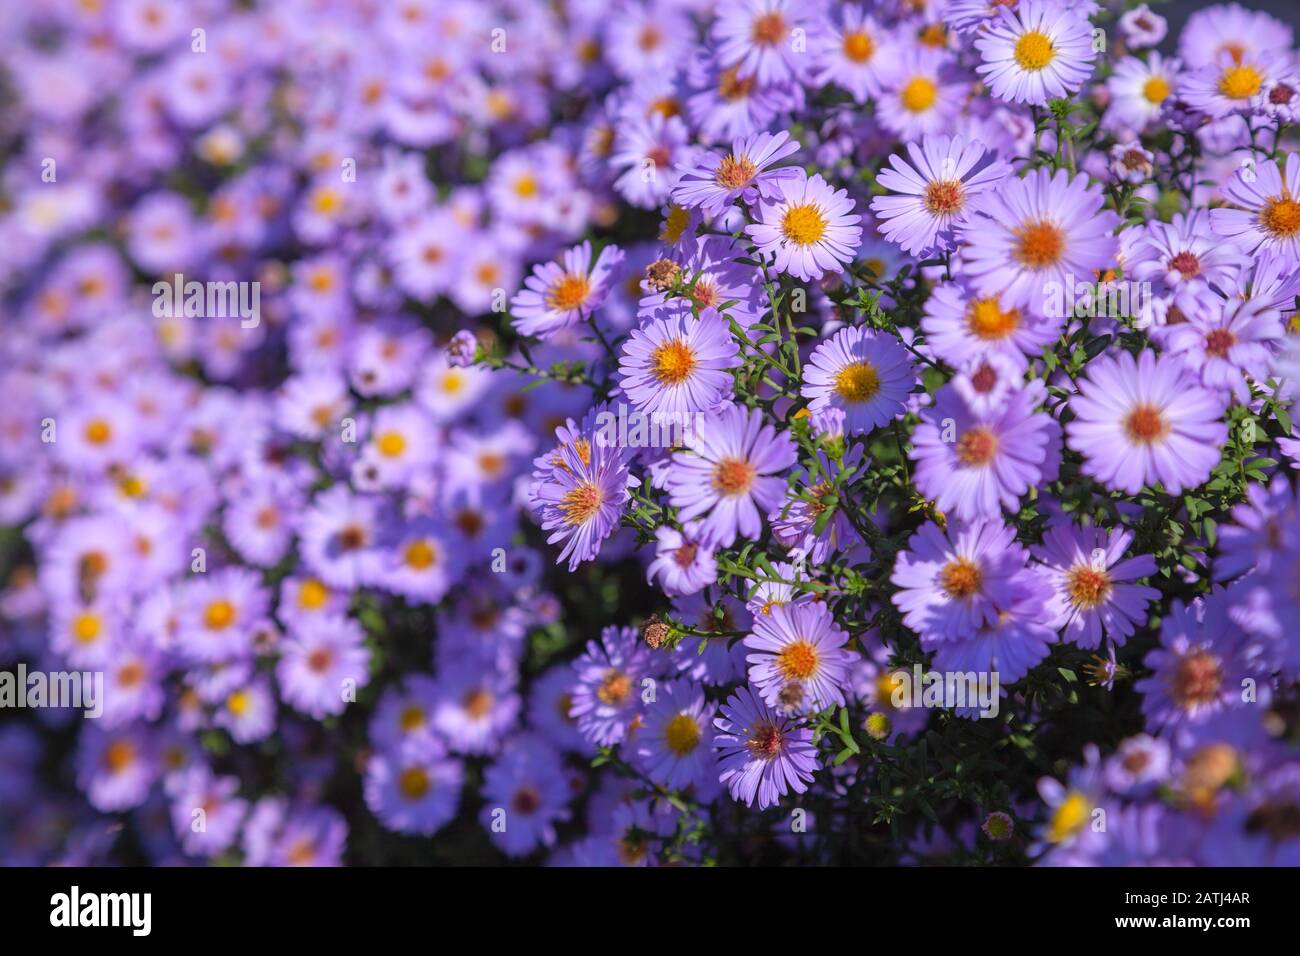 Flowers Aster long-term, bush on a flower bed, closeup Stock Photo